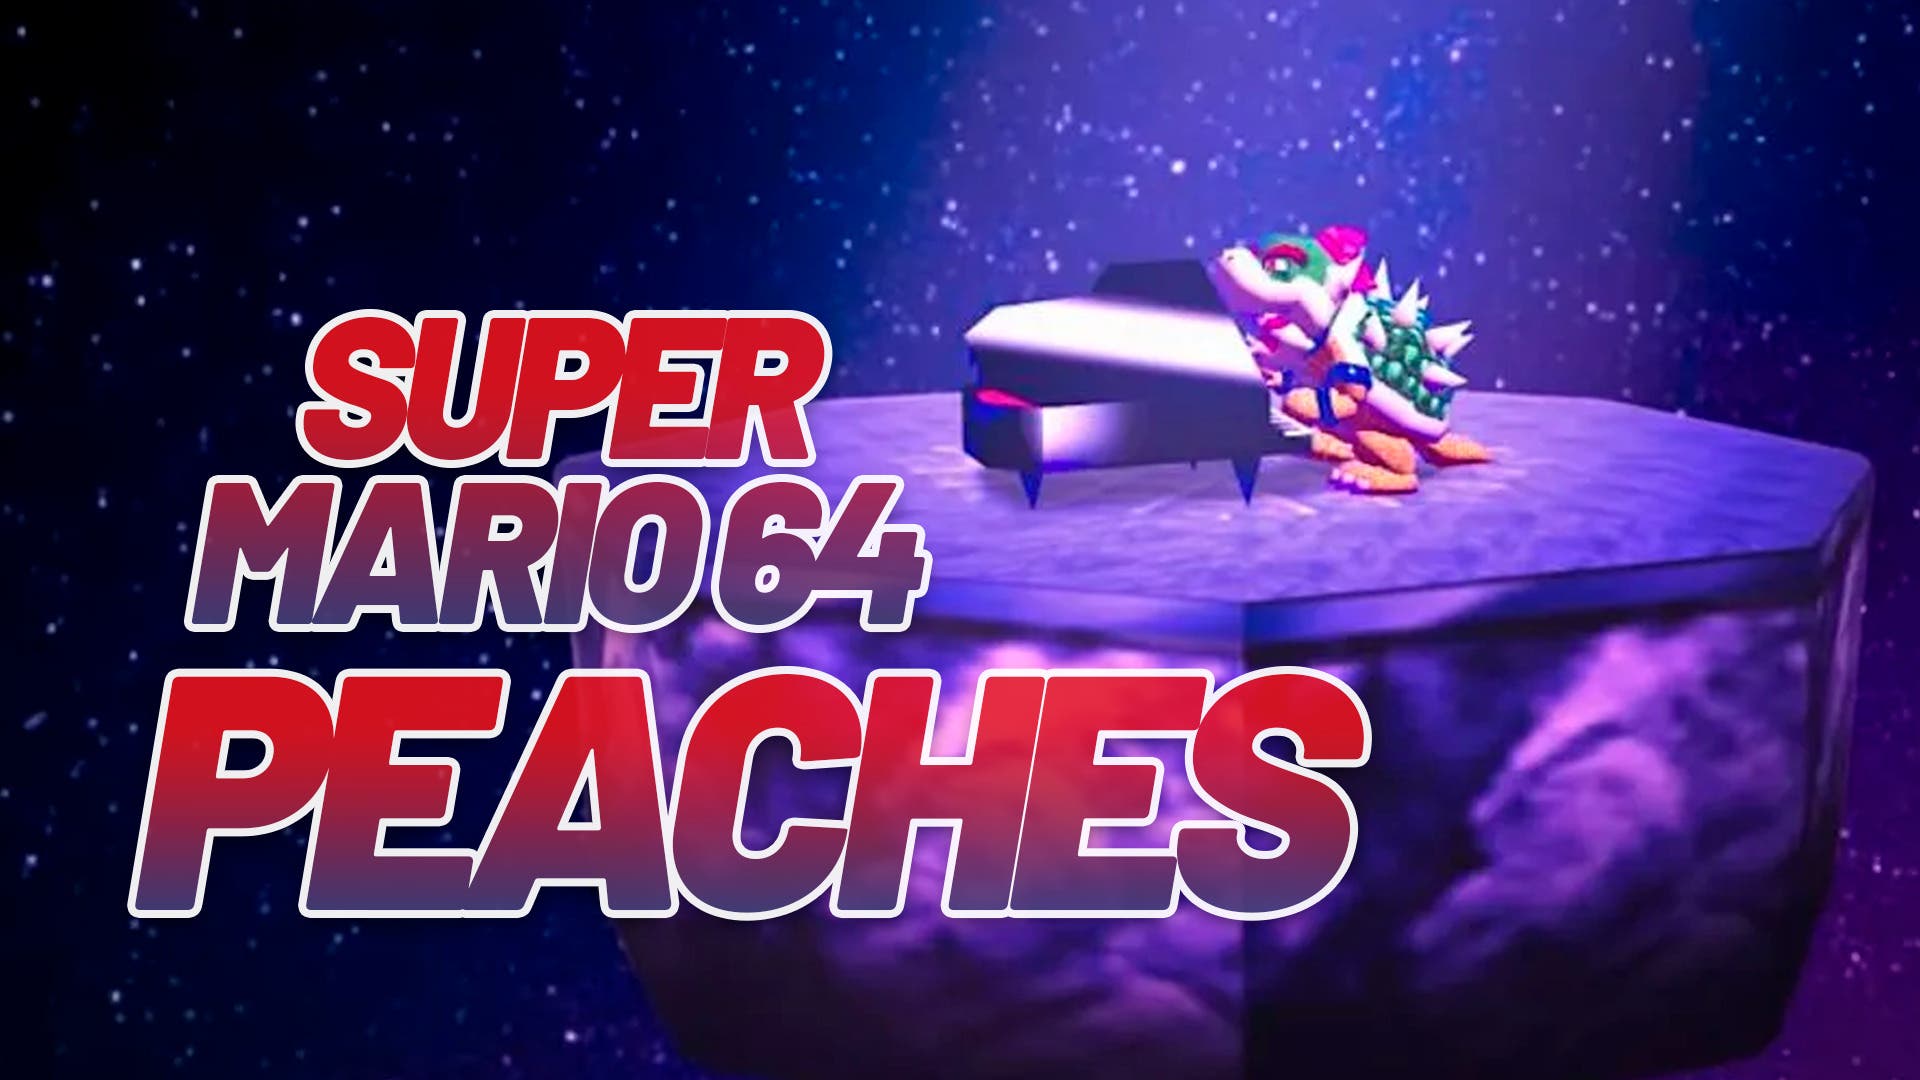 They recreate in Super Mario 64 the great song “Peaches” performed by Jack Black in the Super Mario Bros.